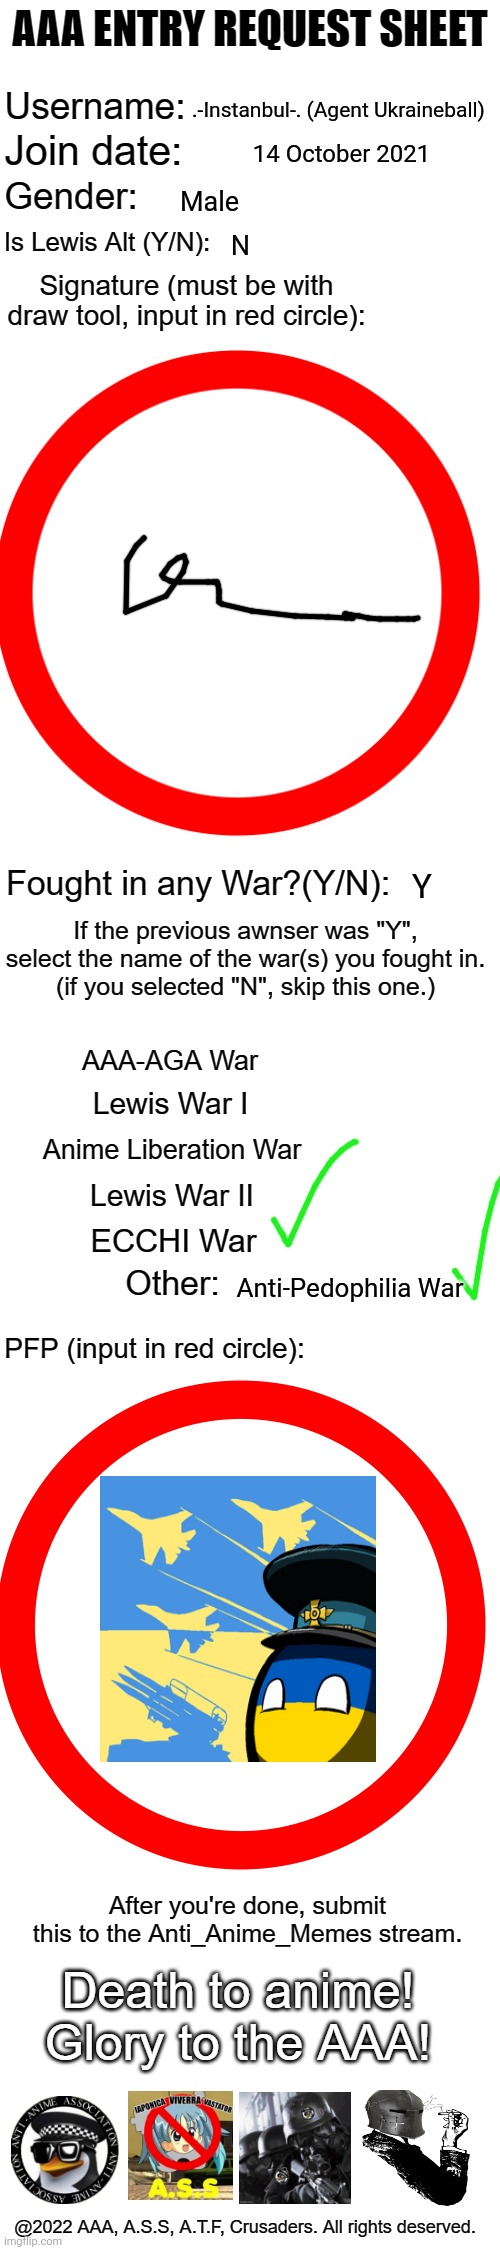 AAA Entry Request Sheet | .-Instanbul-. (Agent Ukraineball); 14 October 2021; Male; N; Y; Anti-Pedophilia War | image tagged in aaa entry request sheet | made w/ Imgflip meme maker